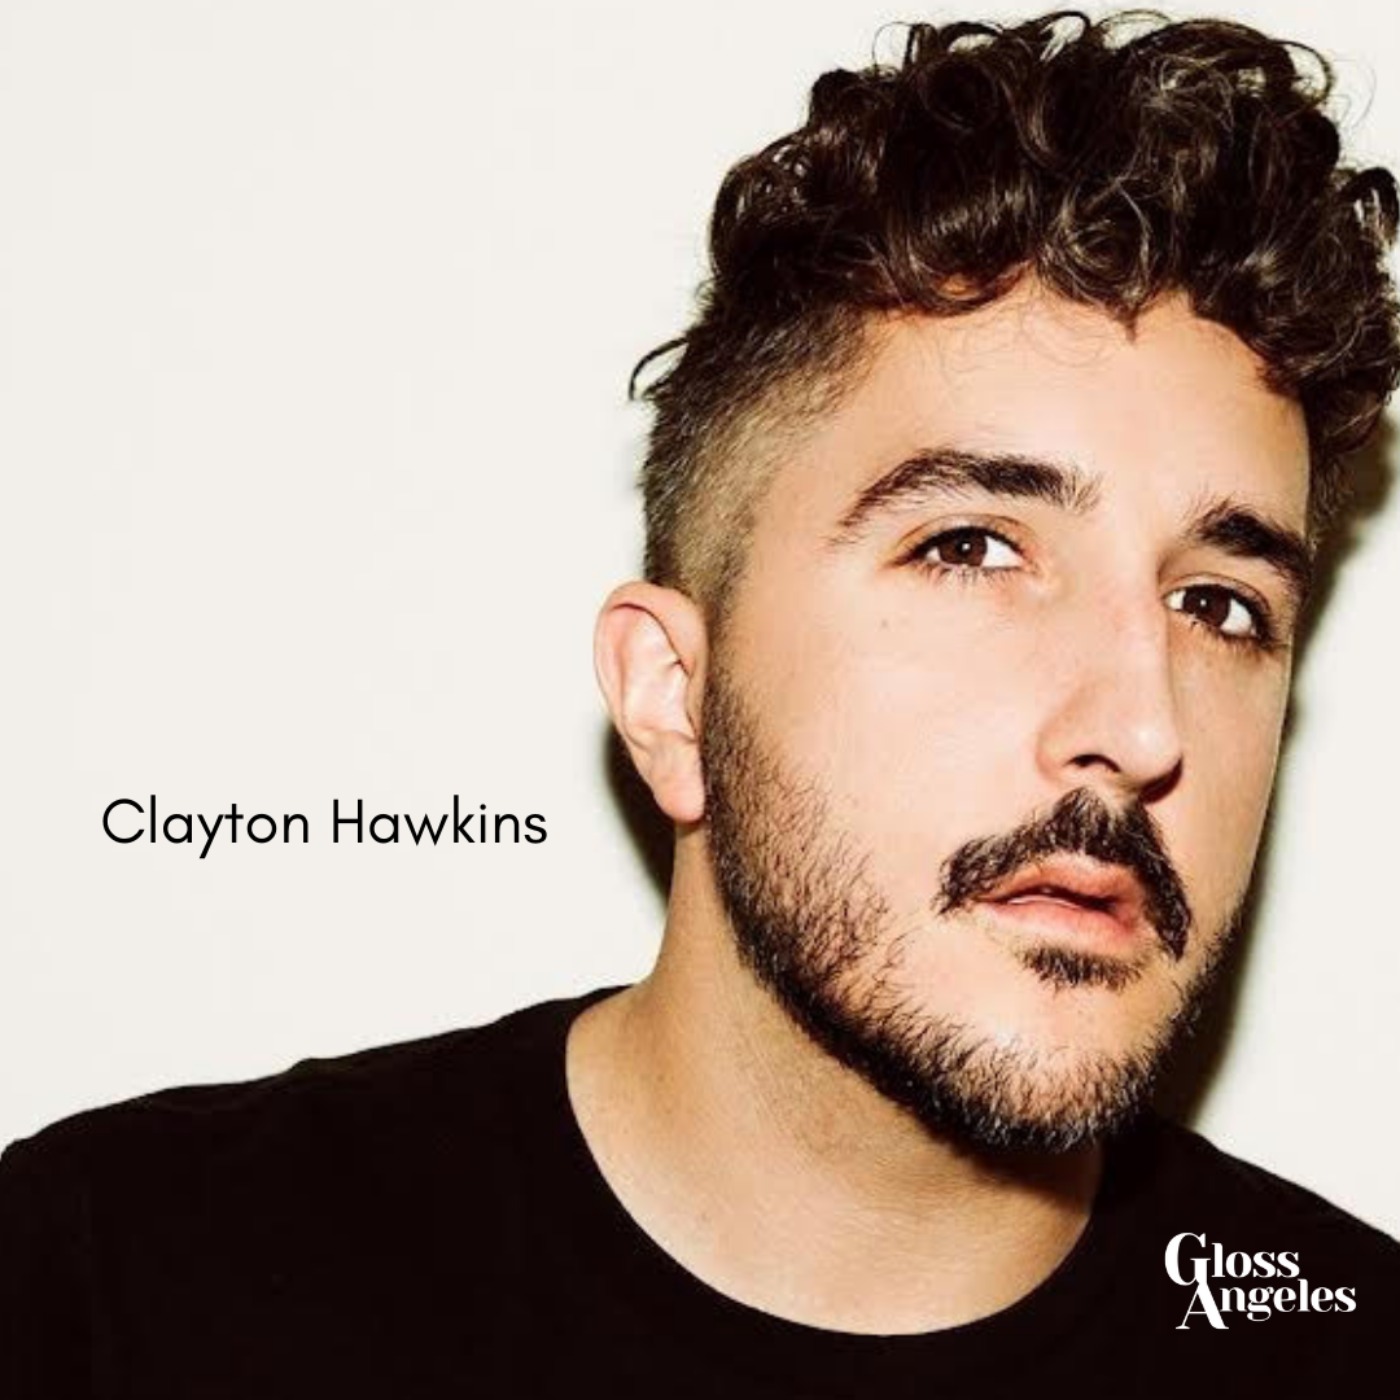 Funny Guy Clayton Hawkins Shares His Wigs, His Wit and His Work with Olivia Rodrigo and Elizabeth Olsen